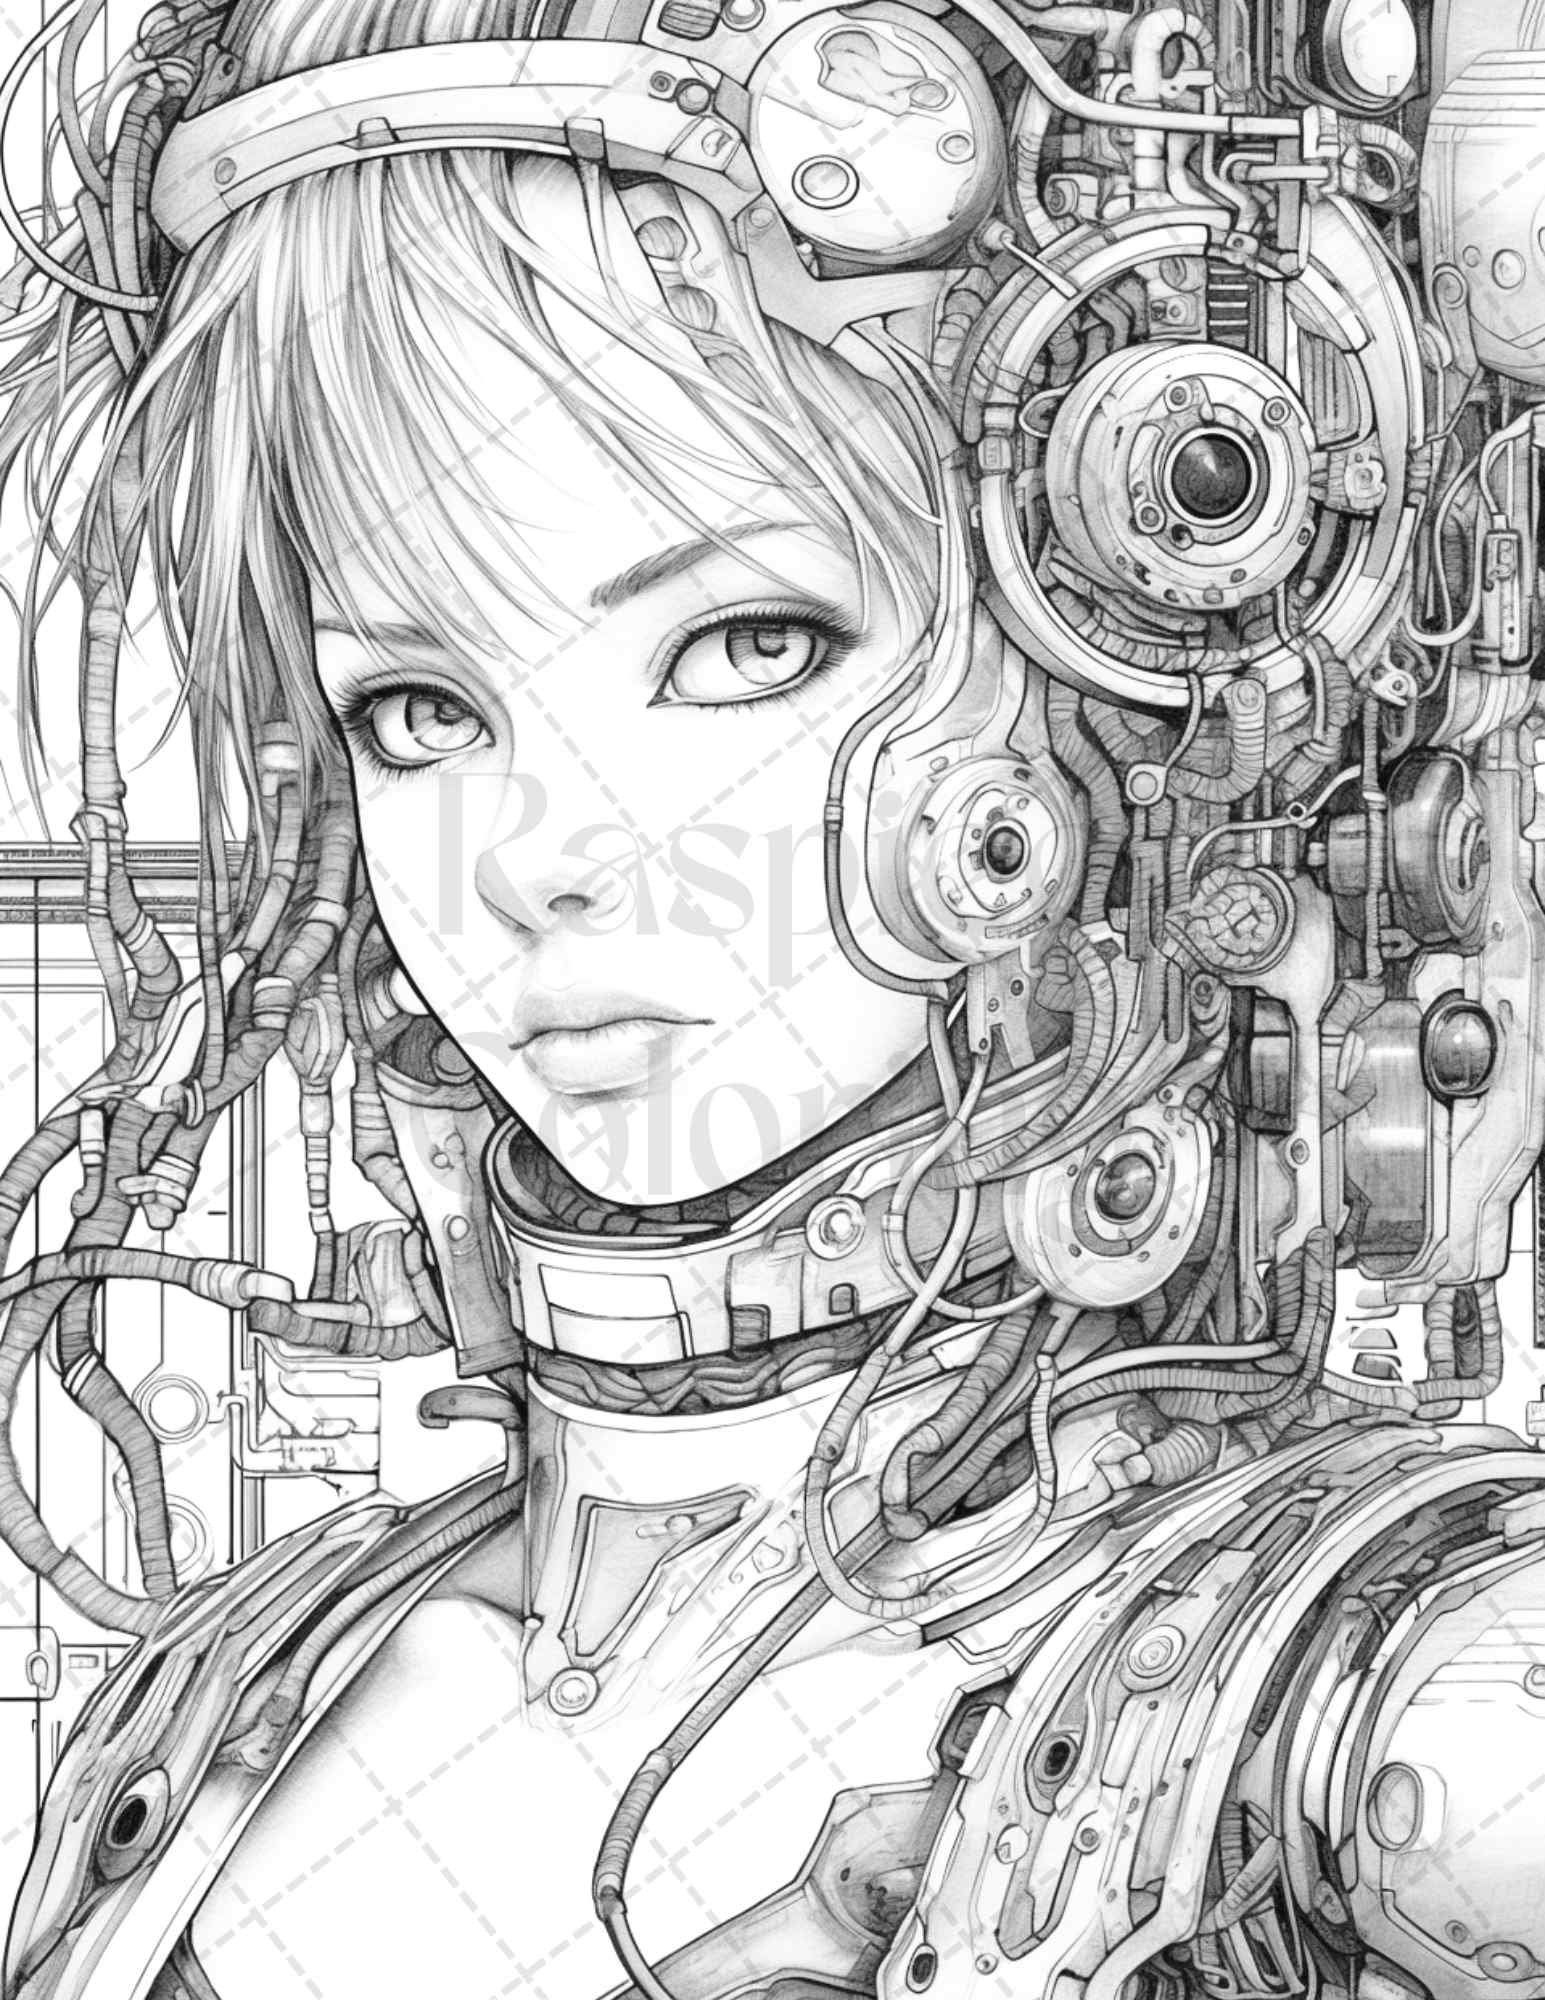 Cyborg girls grayscale coloring pages, printable coloring book for adults, stress relief artwork, unique grayscale illustrations, printable art for creative therapy, portrait coloring pages for adults